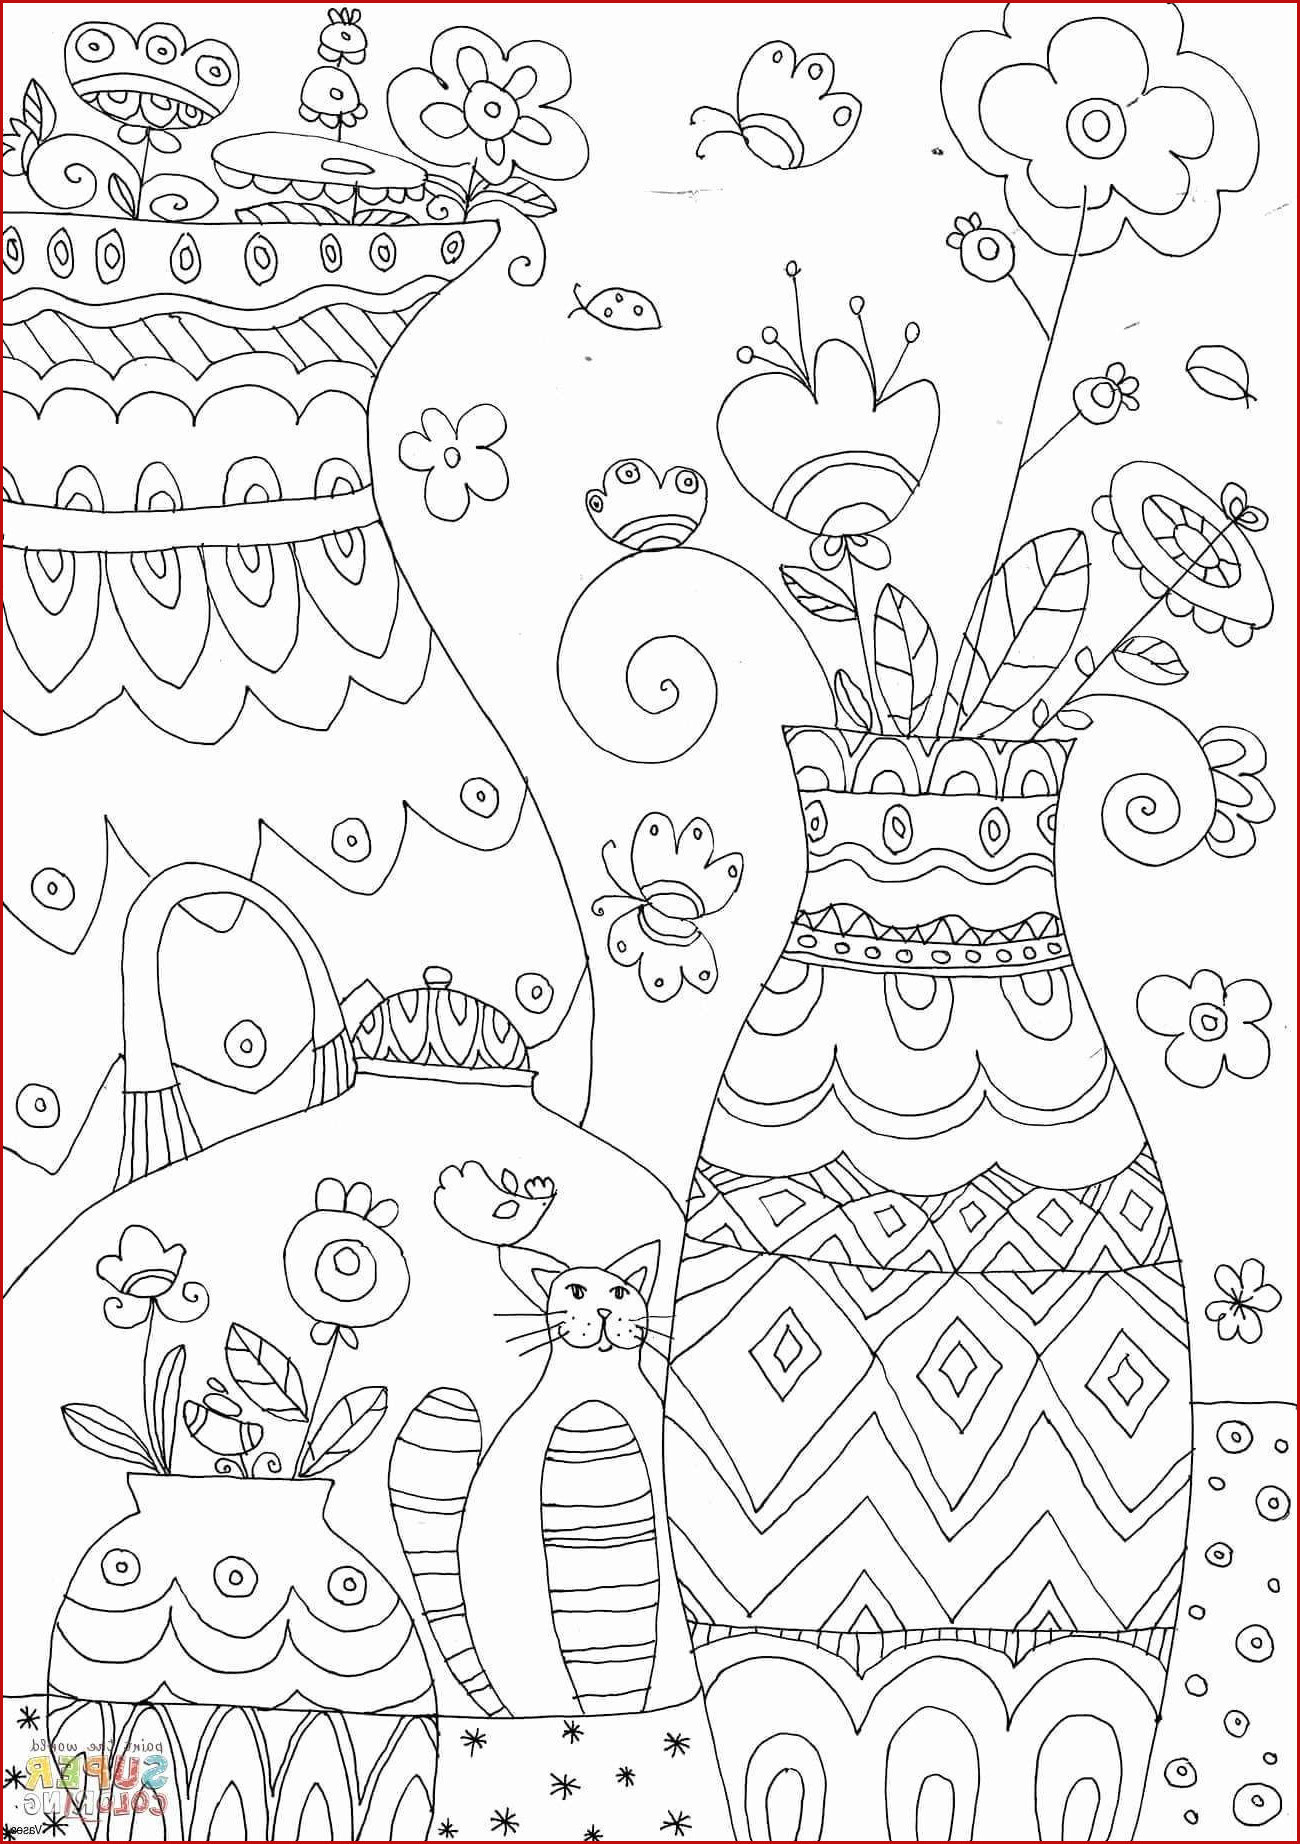 quilters coloring book new photos extraordinary coloring pages games image coloring pages for free of quilters coloring book